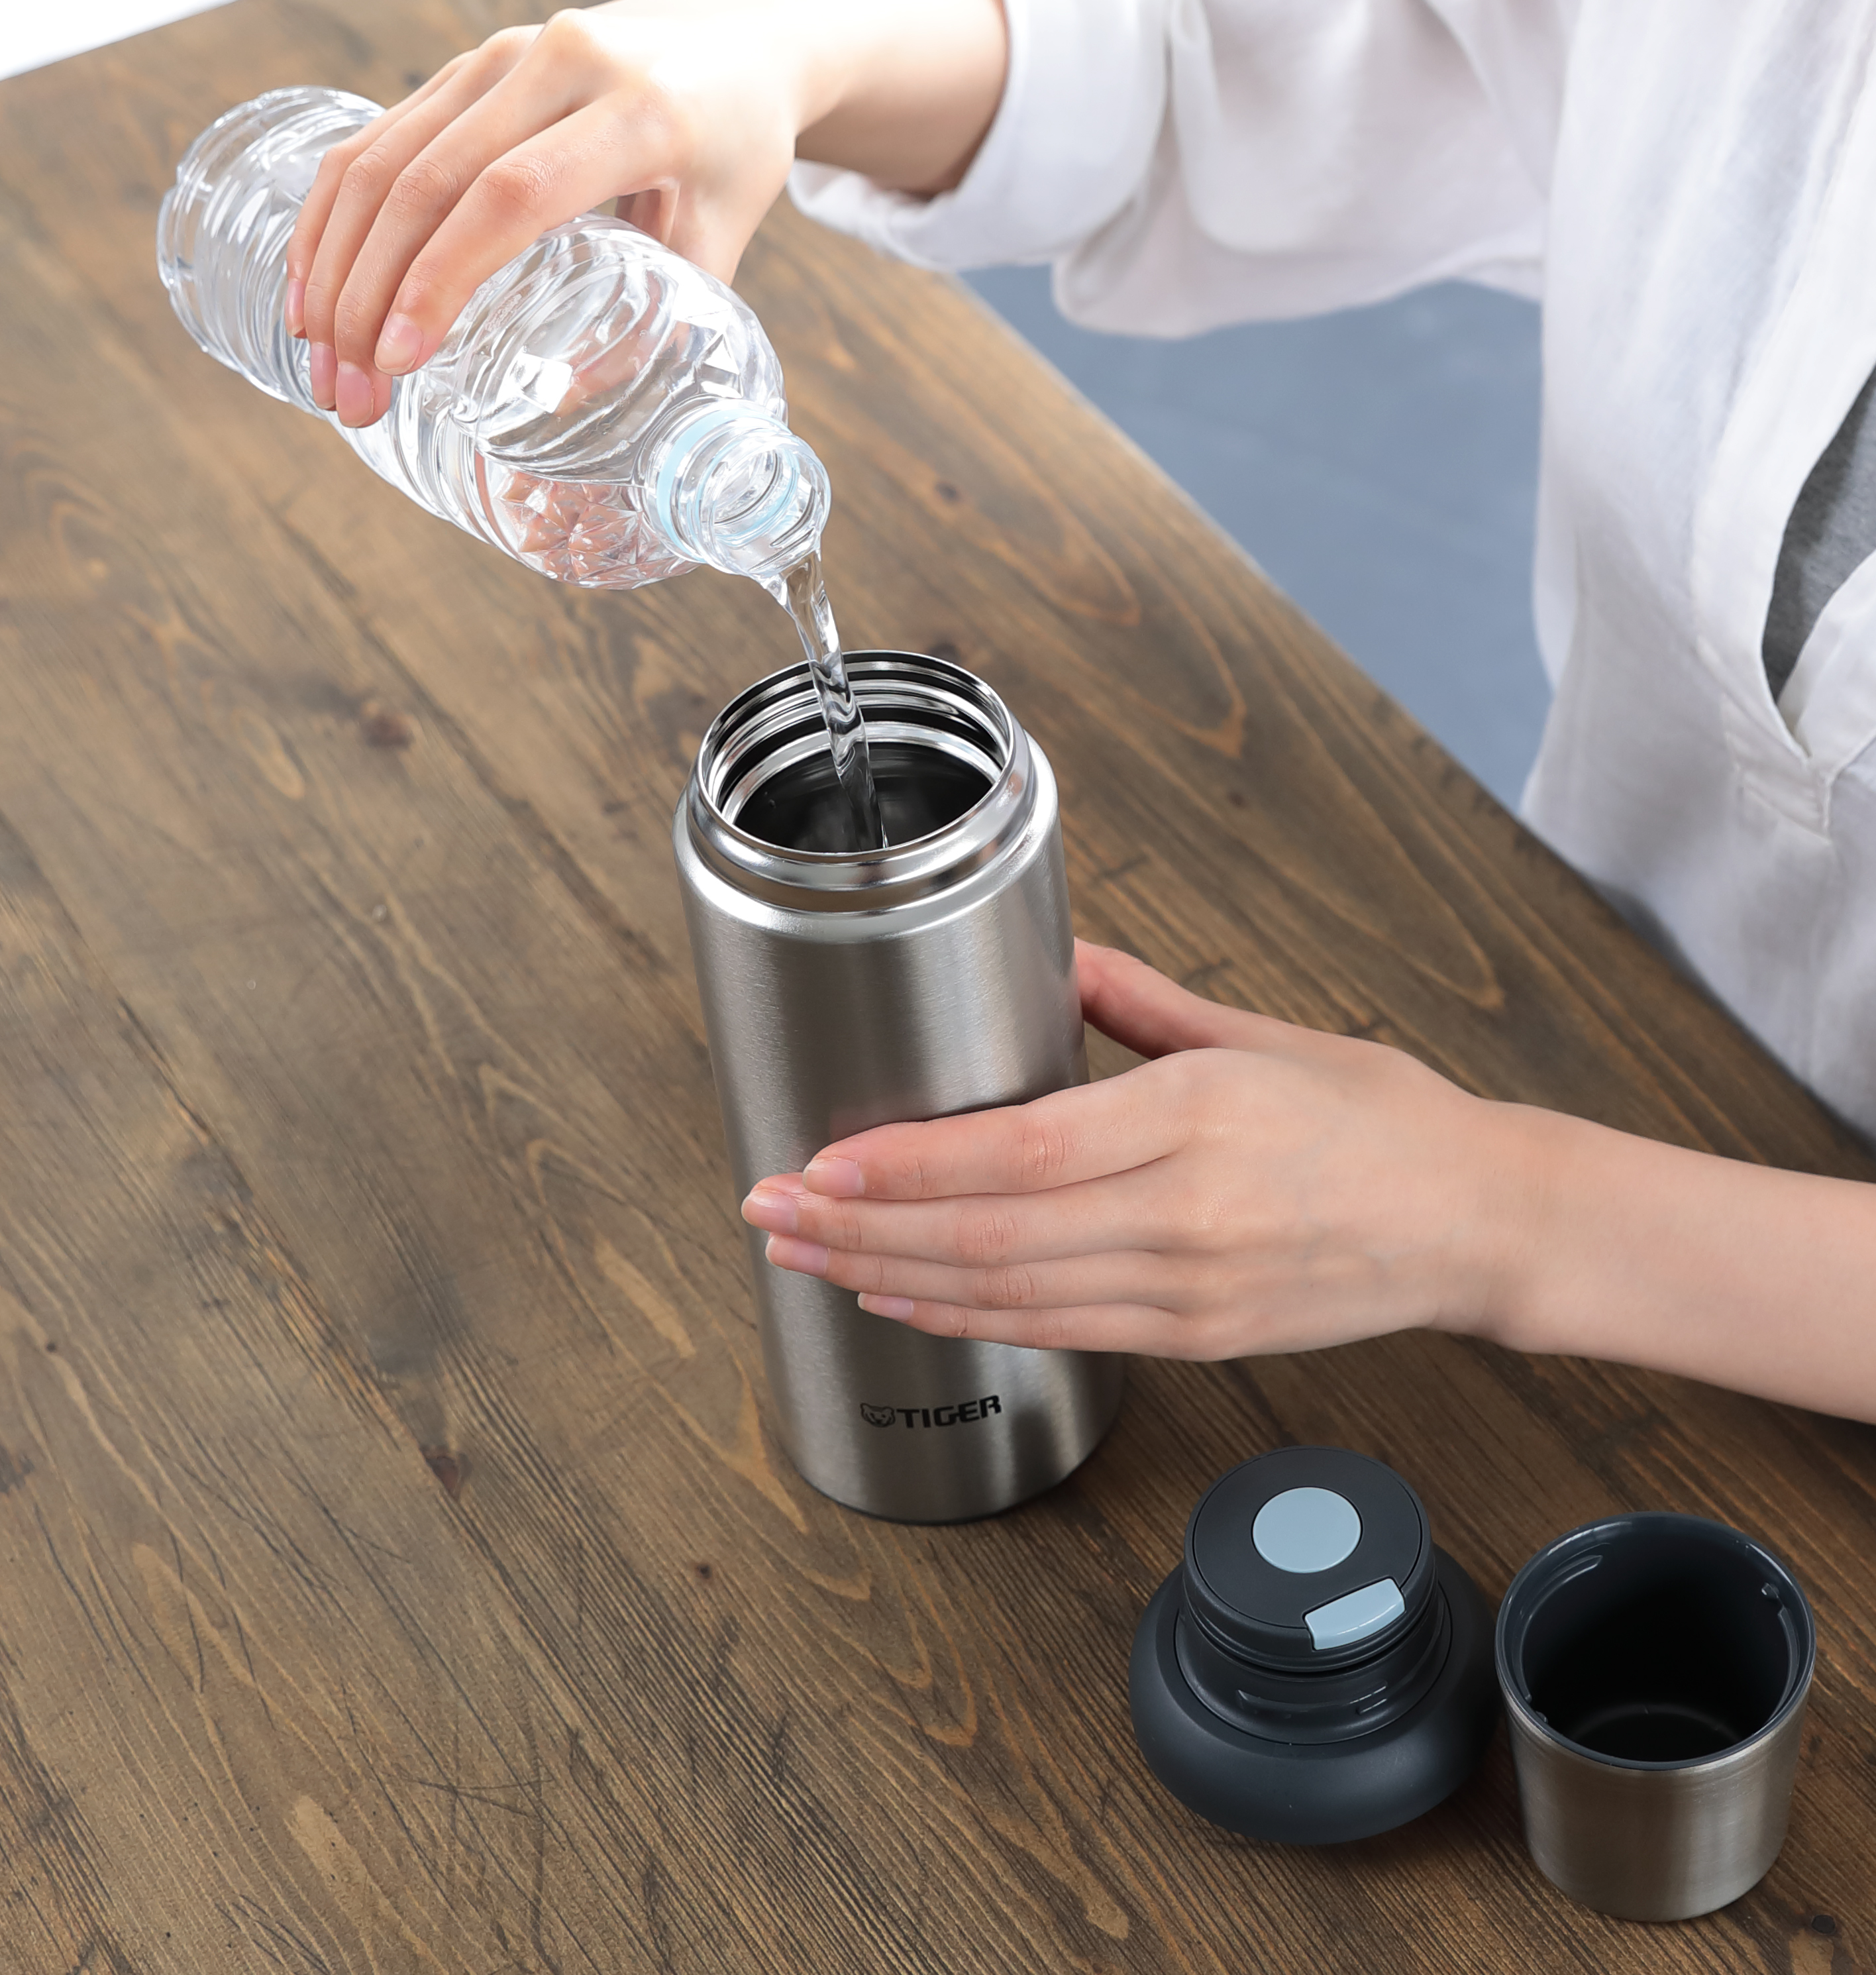 stainless-steel-thermal-bottle-msi-comes-with-a-cup.jpg (3.33 MB)